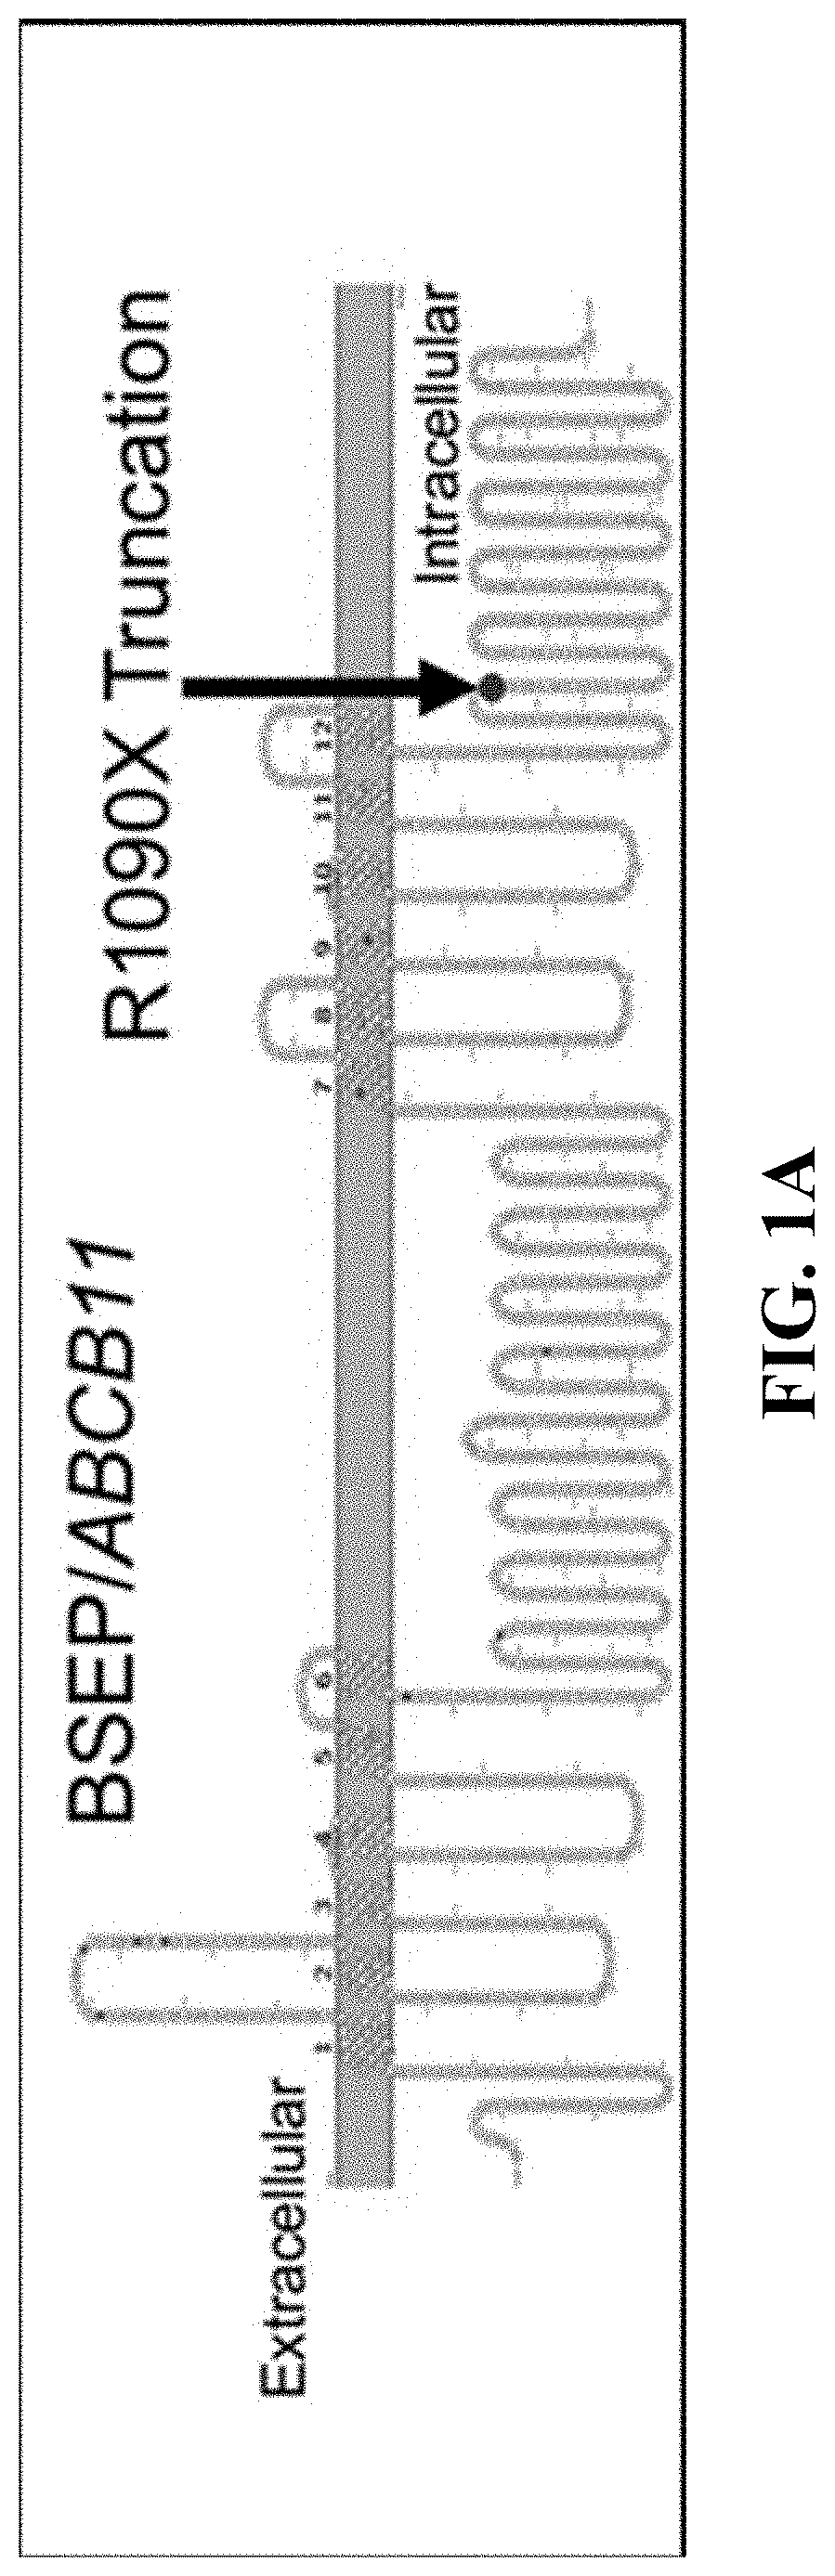 In vitro cell culture system for producing hepatocyte-like cells and uses thereof